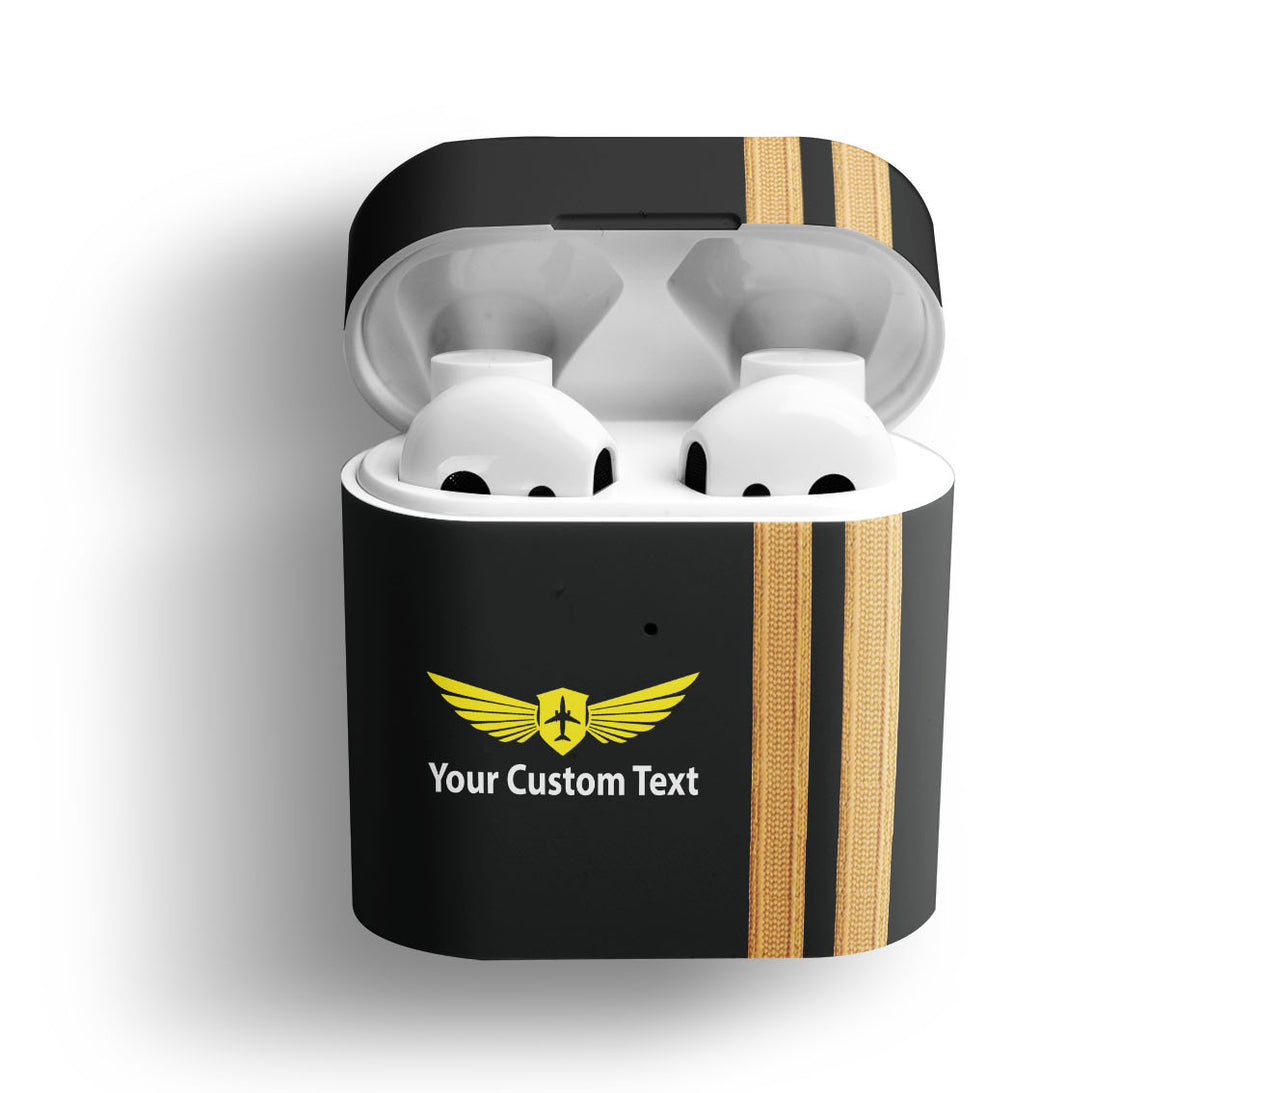 Customizable Name & Special Golden Pilot Epaulettes Designed AirPods Cases